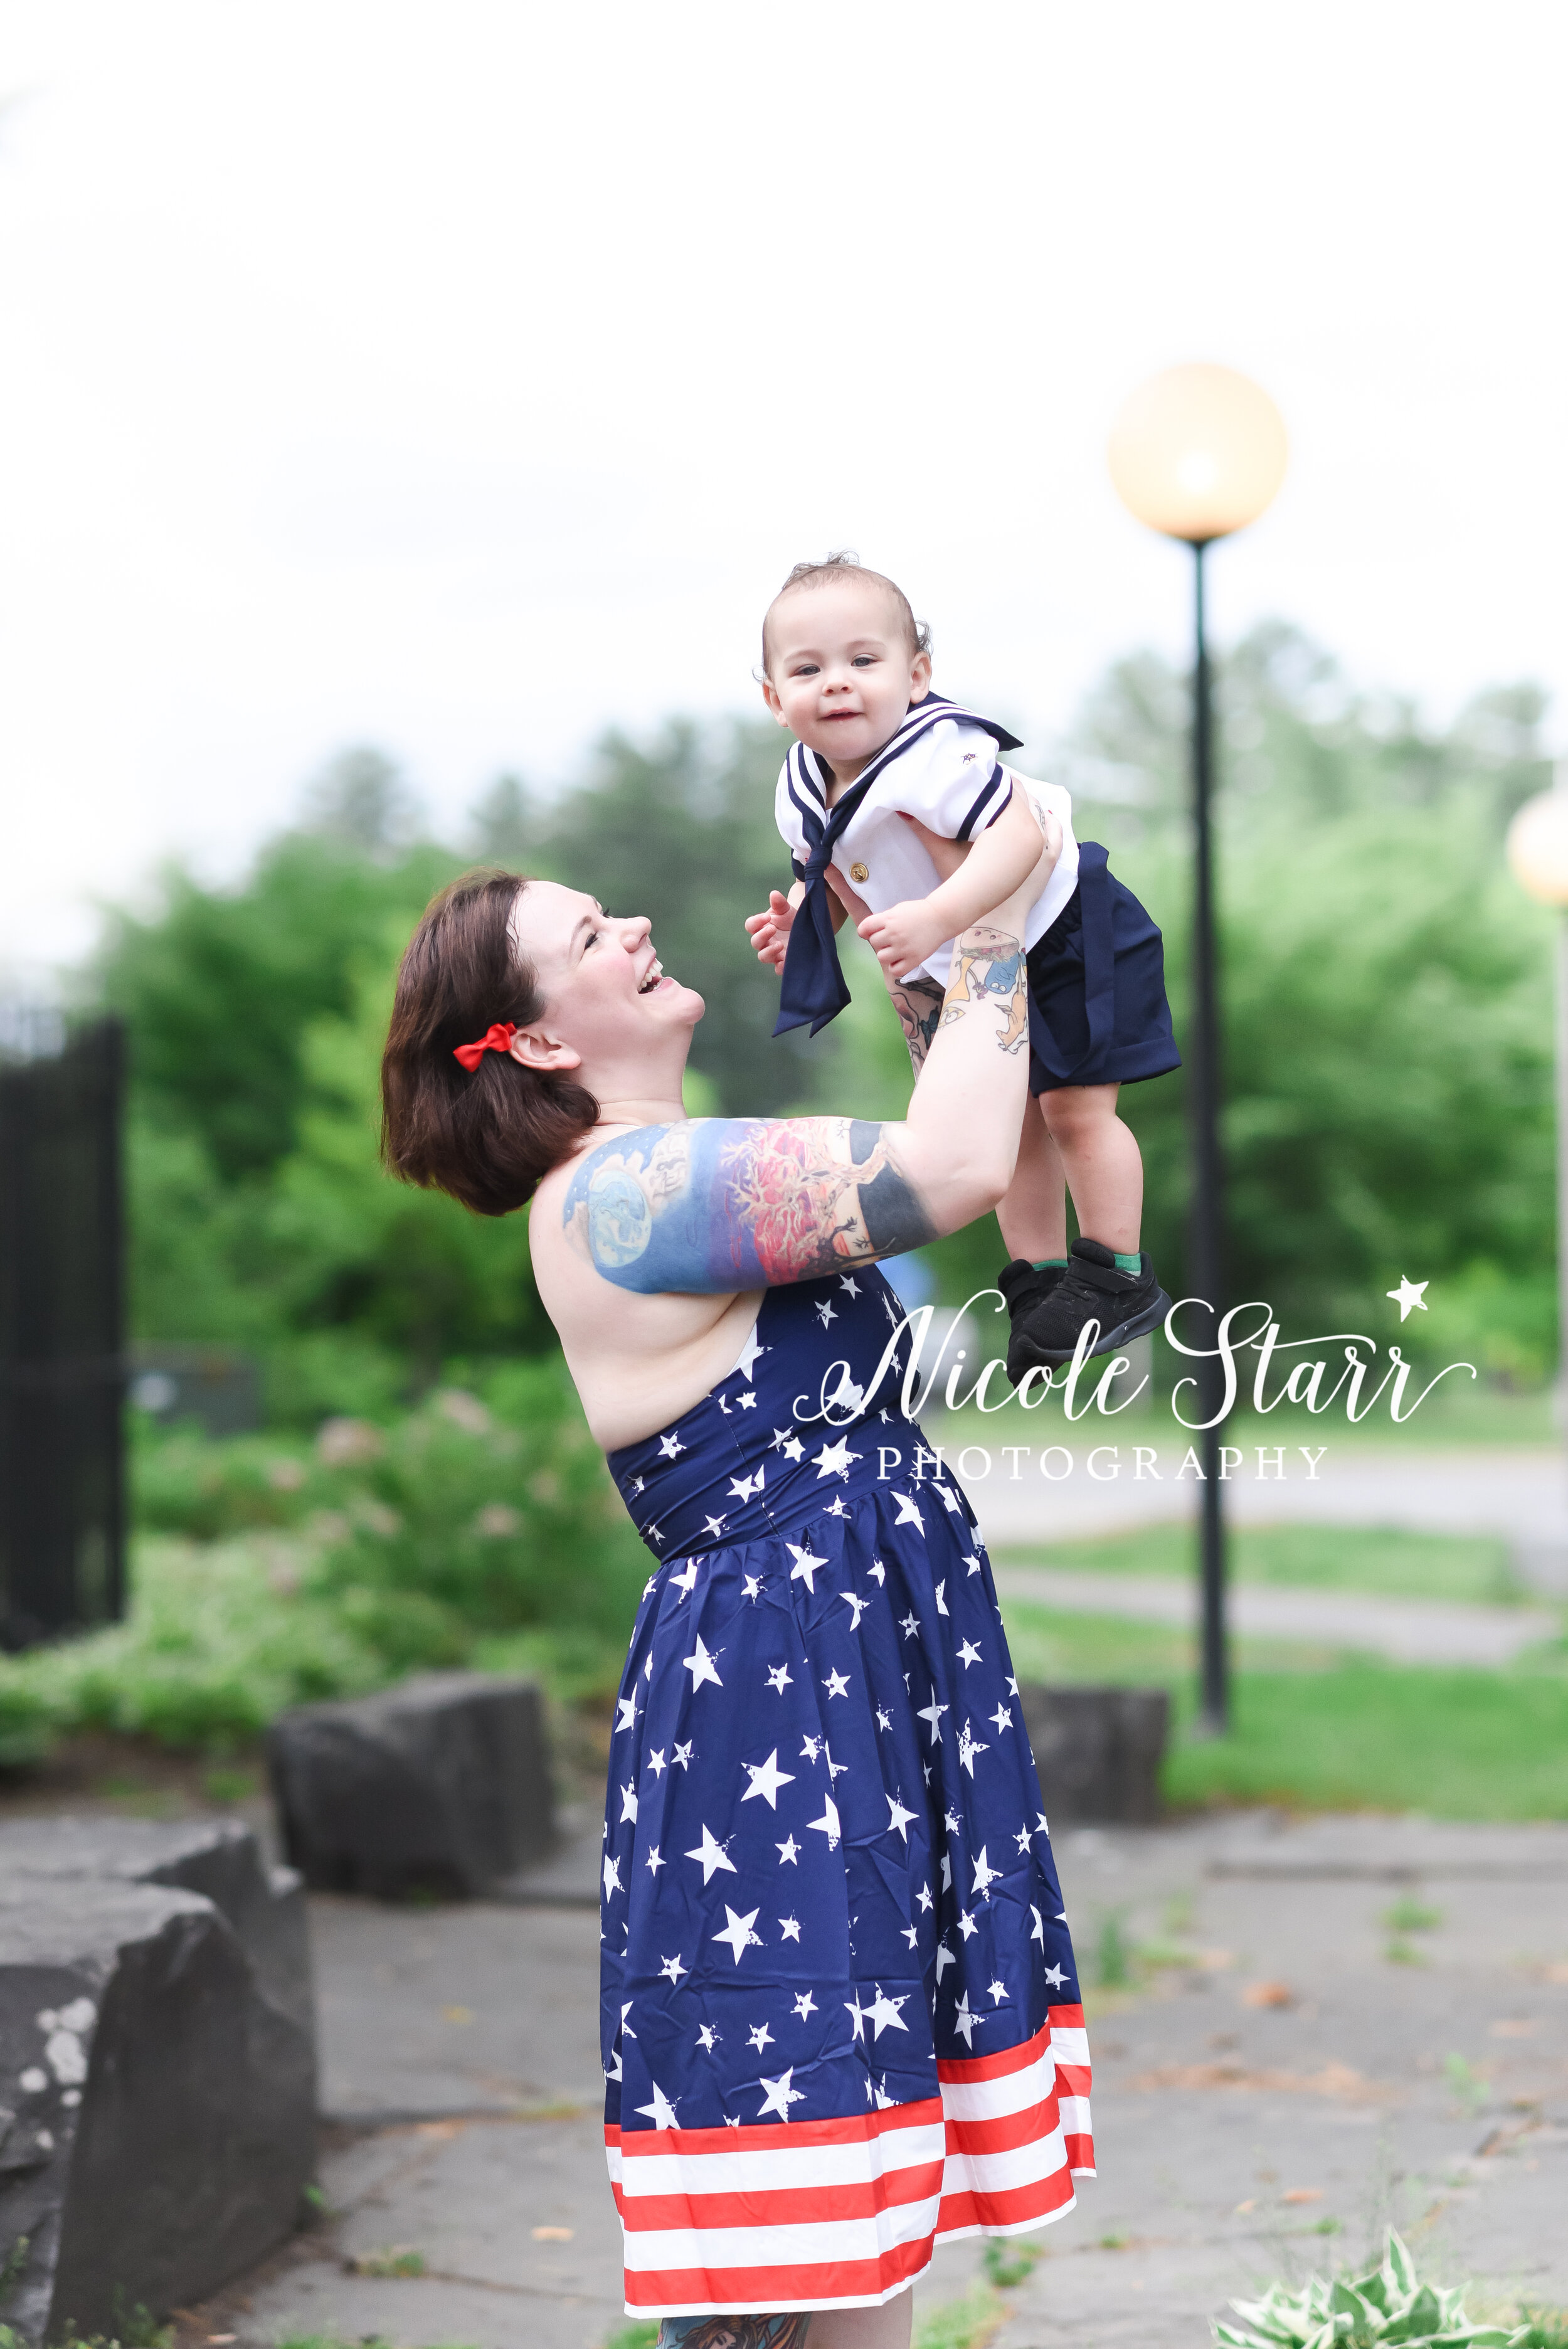 A Summertime Family Portrait Session in Saratoga Springs with an Outdoor  Cake Smash — Saratoga Springs Baby Photographer, Nicole Starr Photography